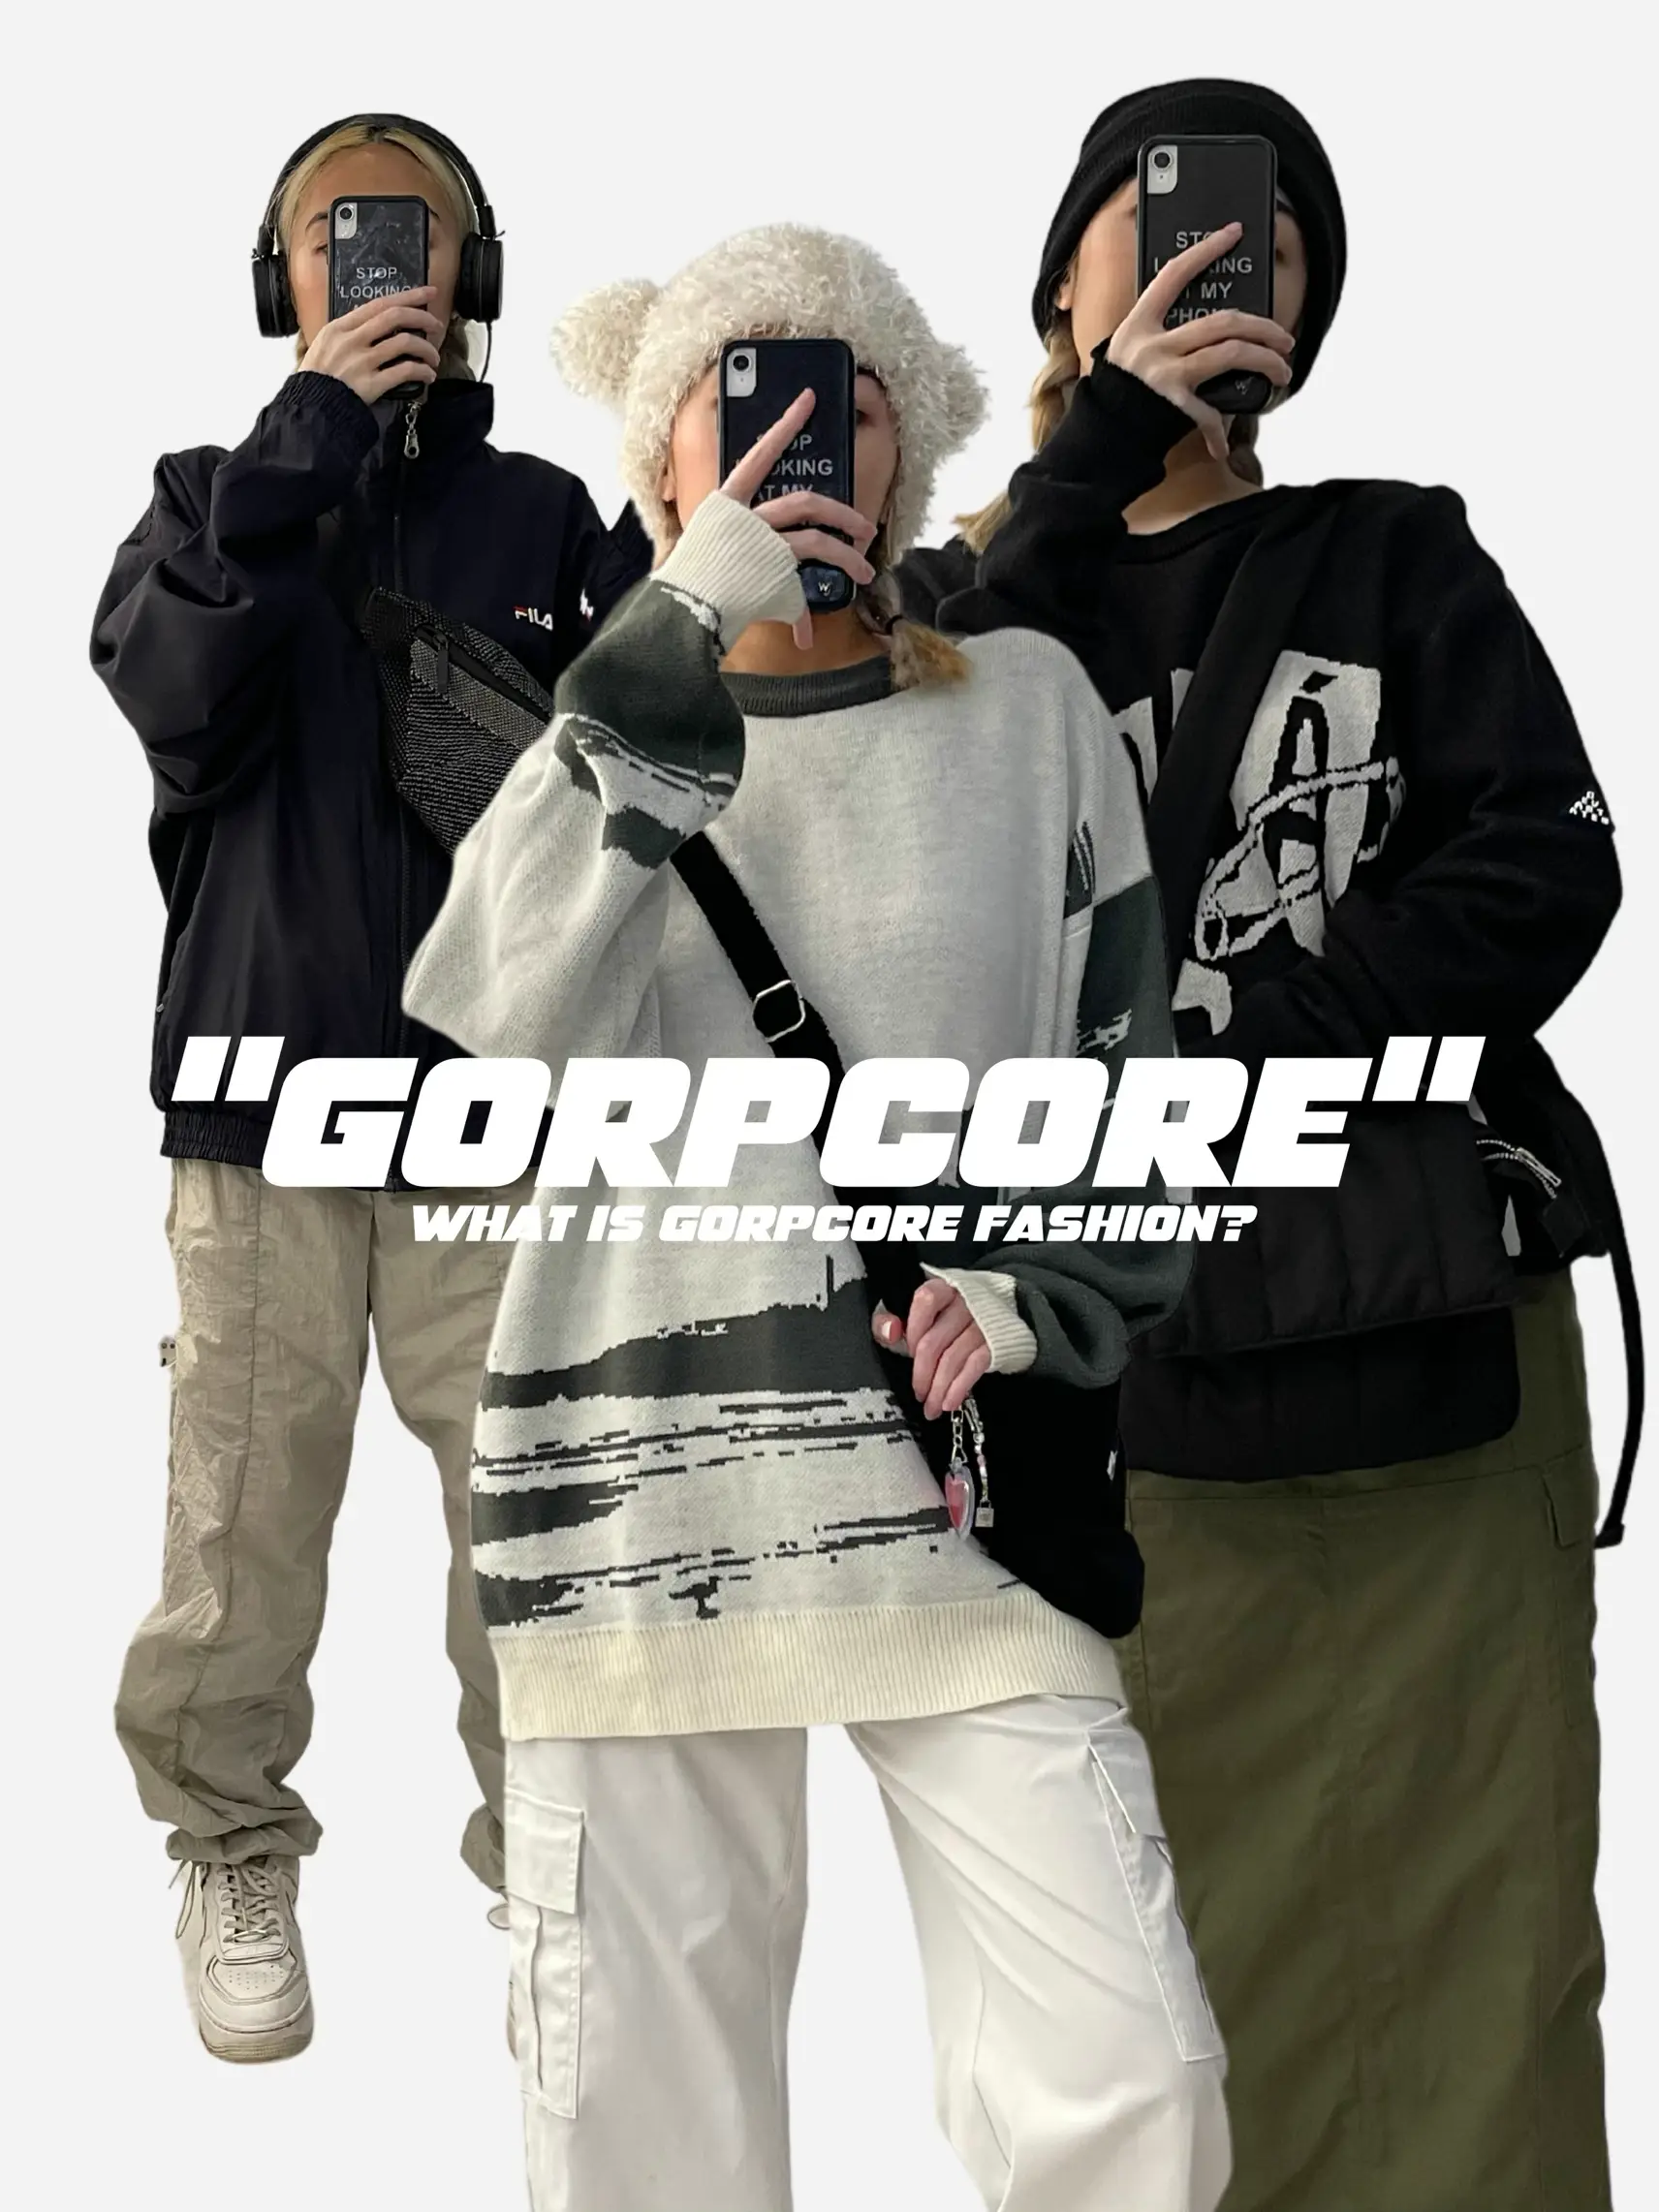 How to get the gorpcore aesthetic?